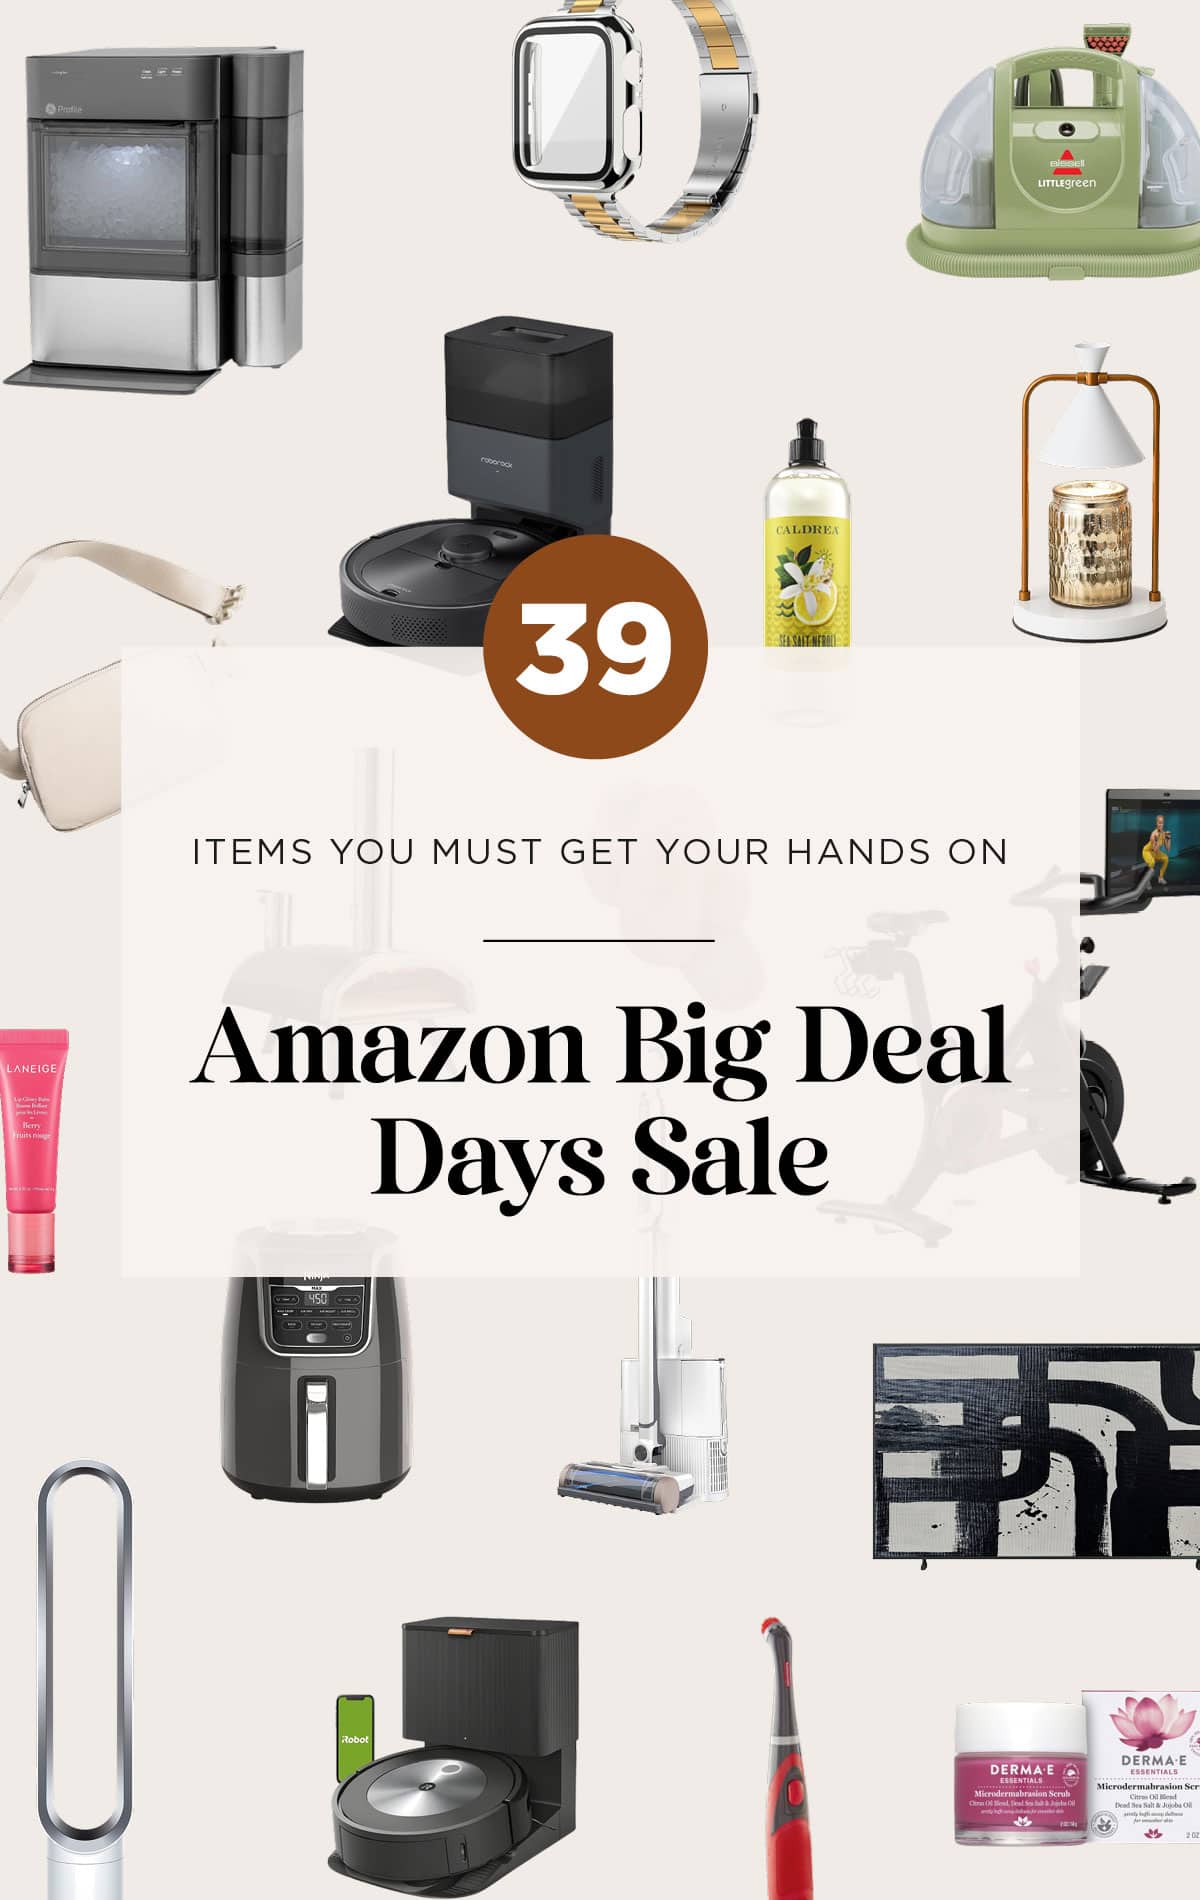 The Ulitmate Guide To The Amazon Prime Big Deal Days Sale  - The Amazon Prime Day sales are huge, but here are the top 39 items you need to know about. 